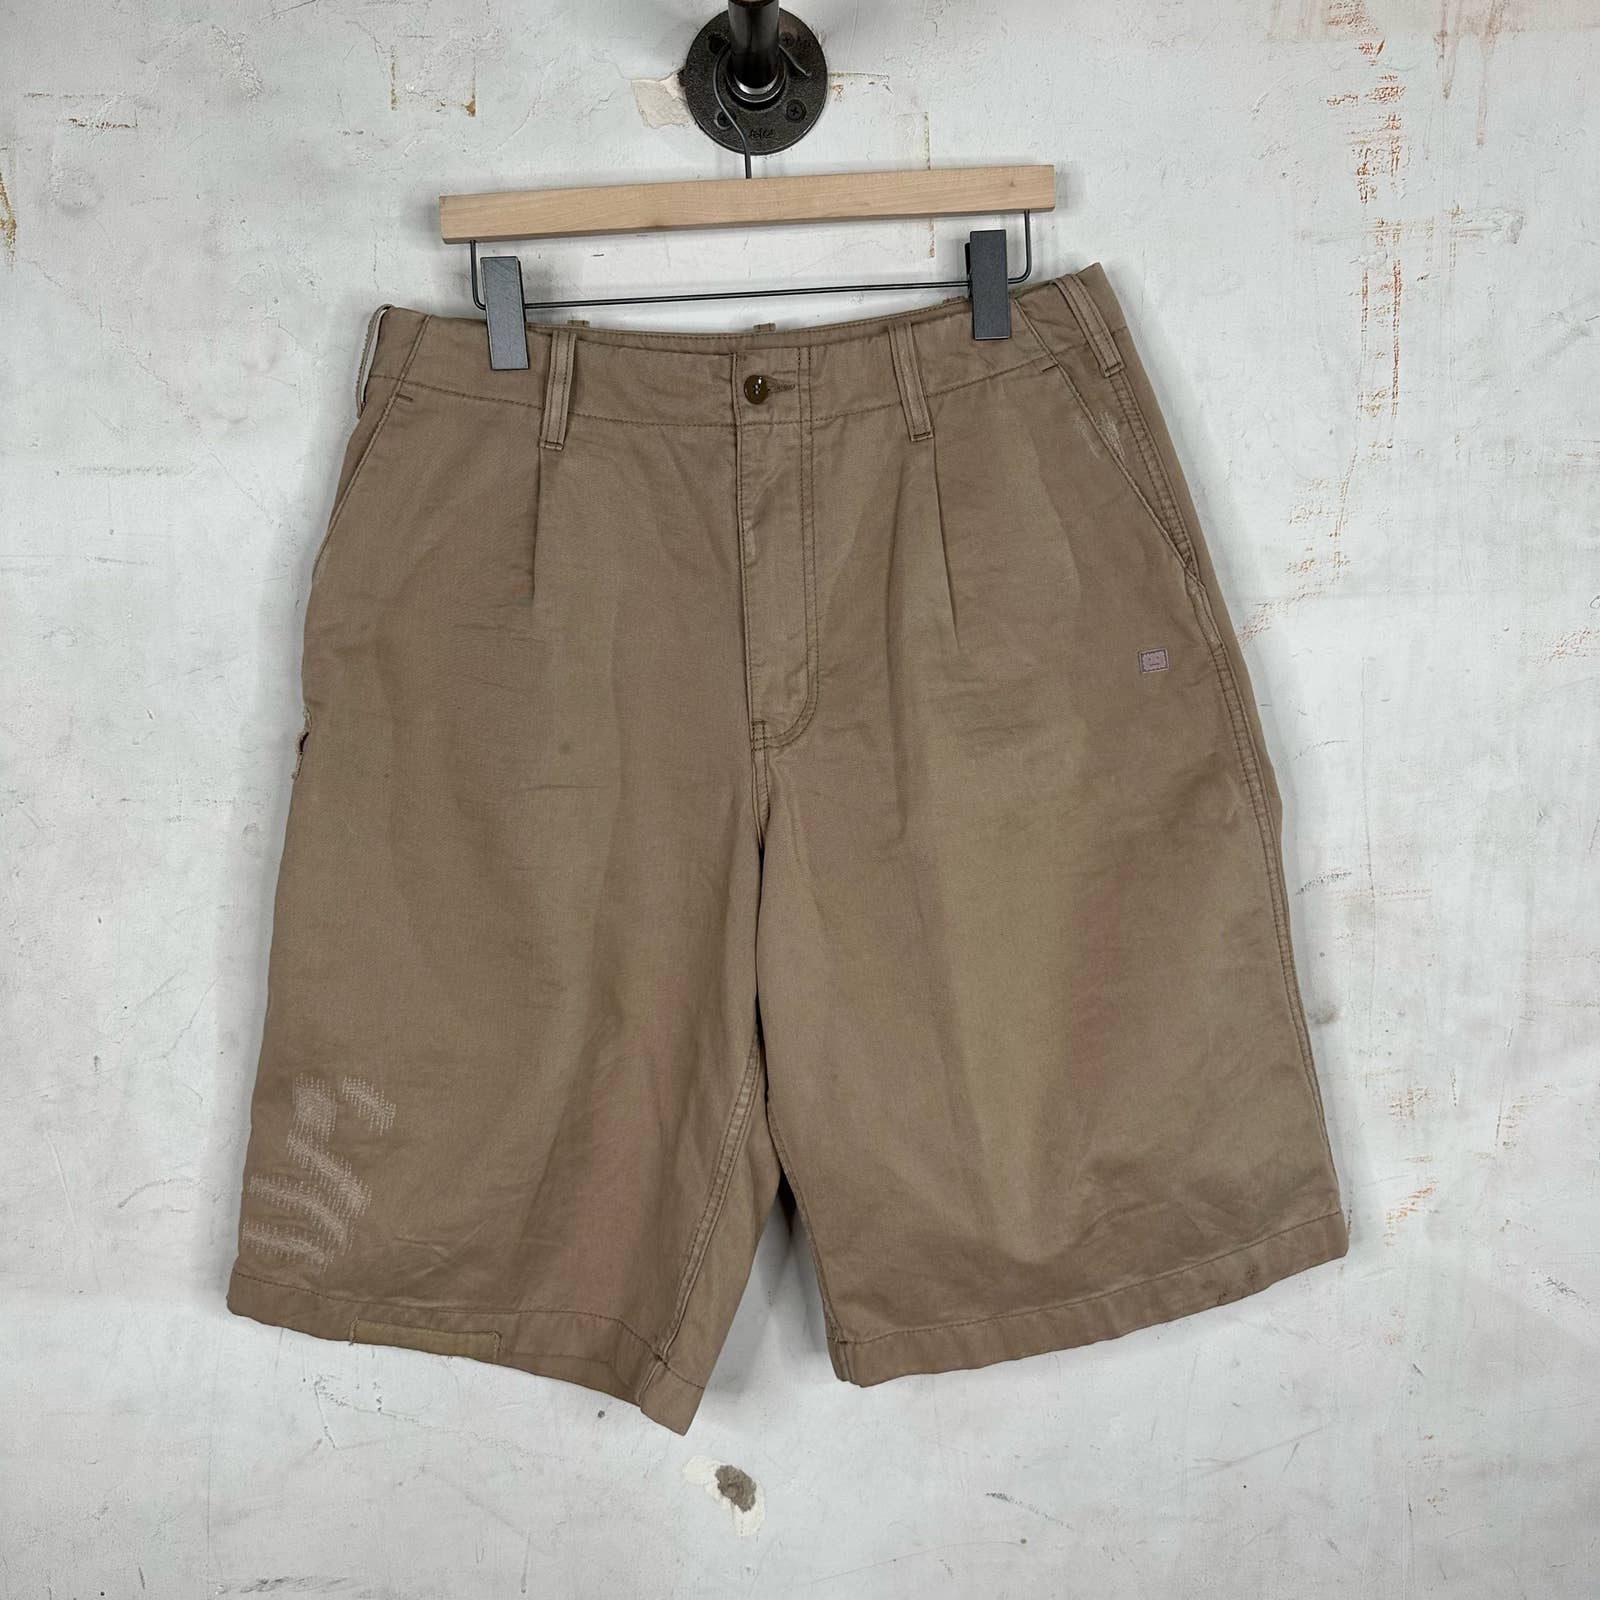 Acne Studios Distressed Baggy Shorts